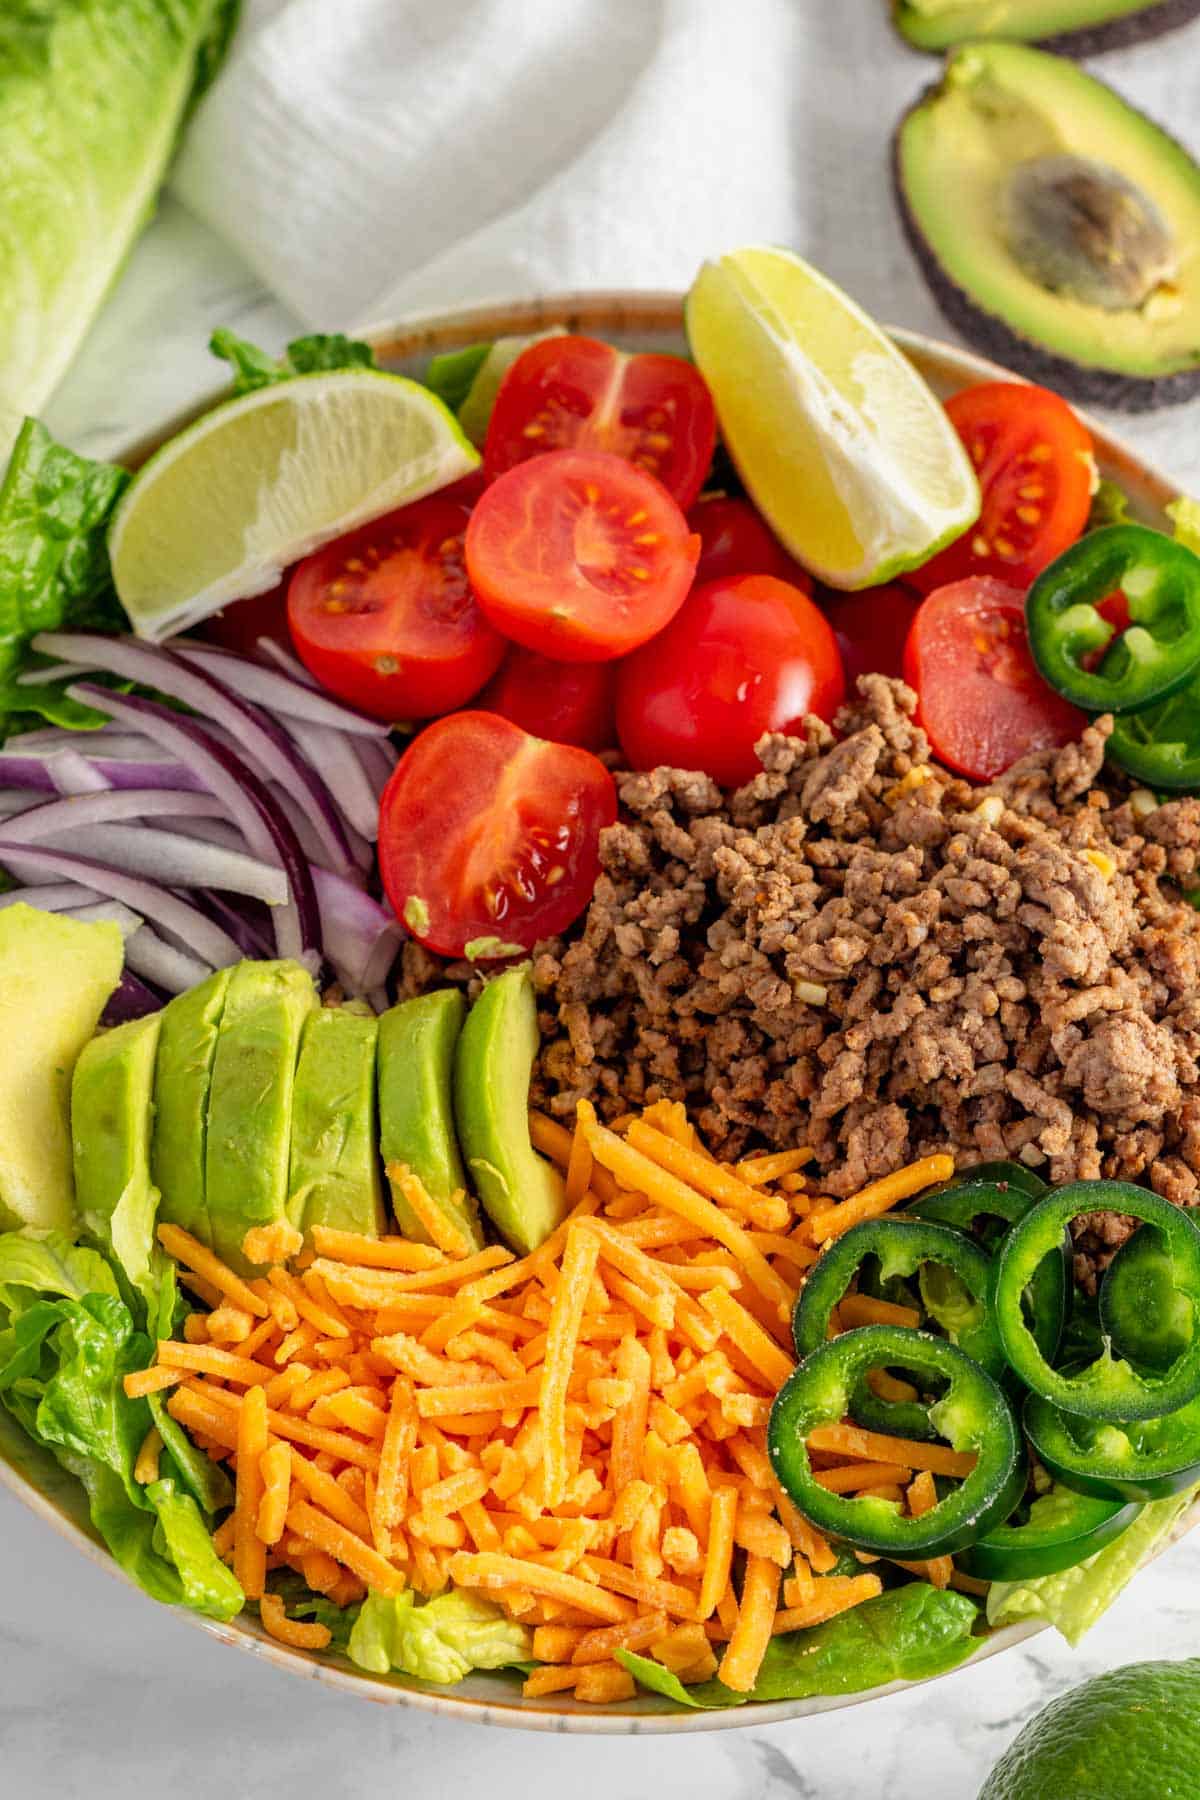 ground beef, tomatoes, avocado and other veggies in a bowl.